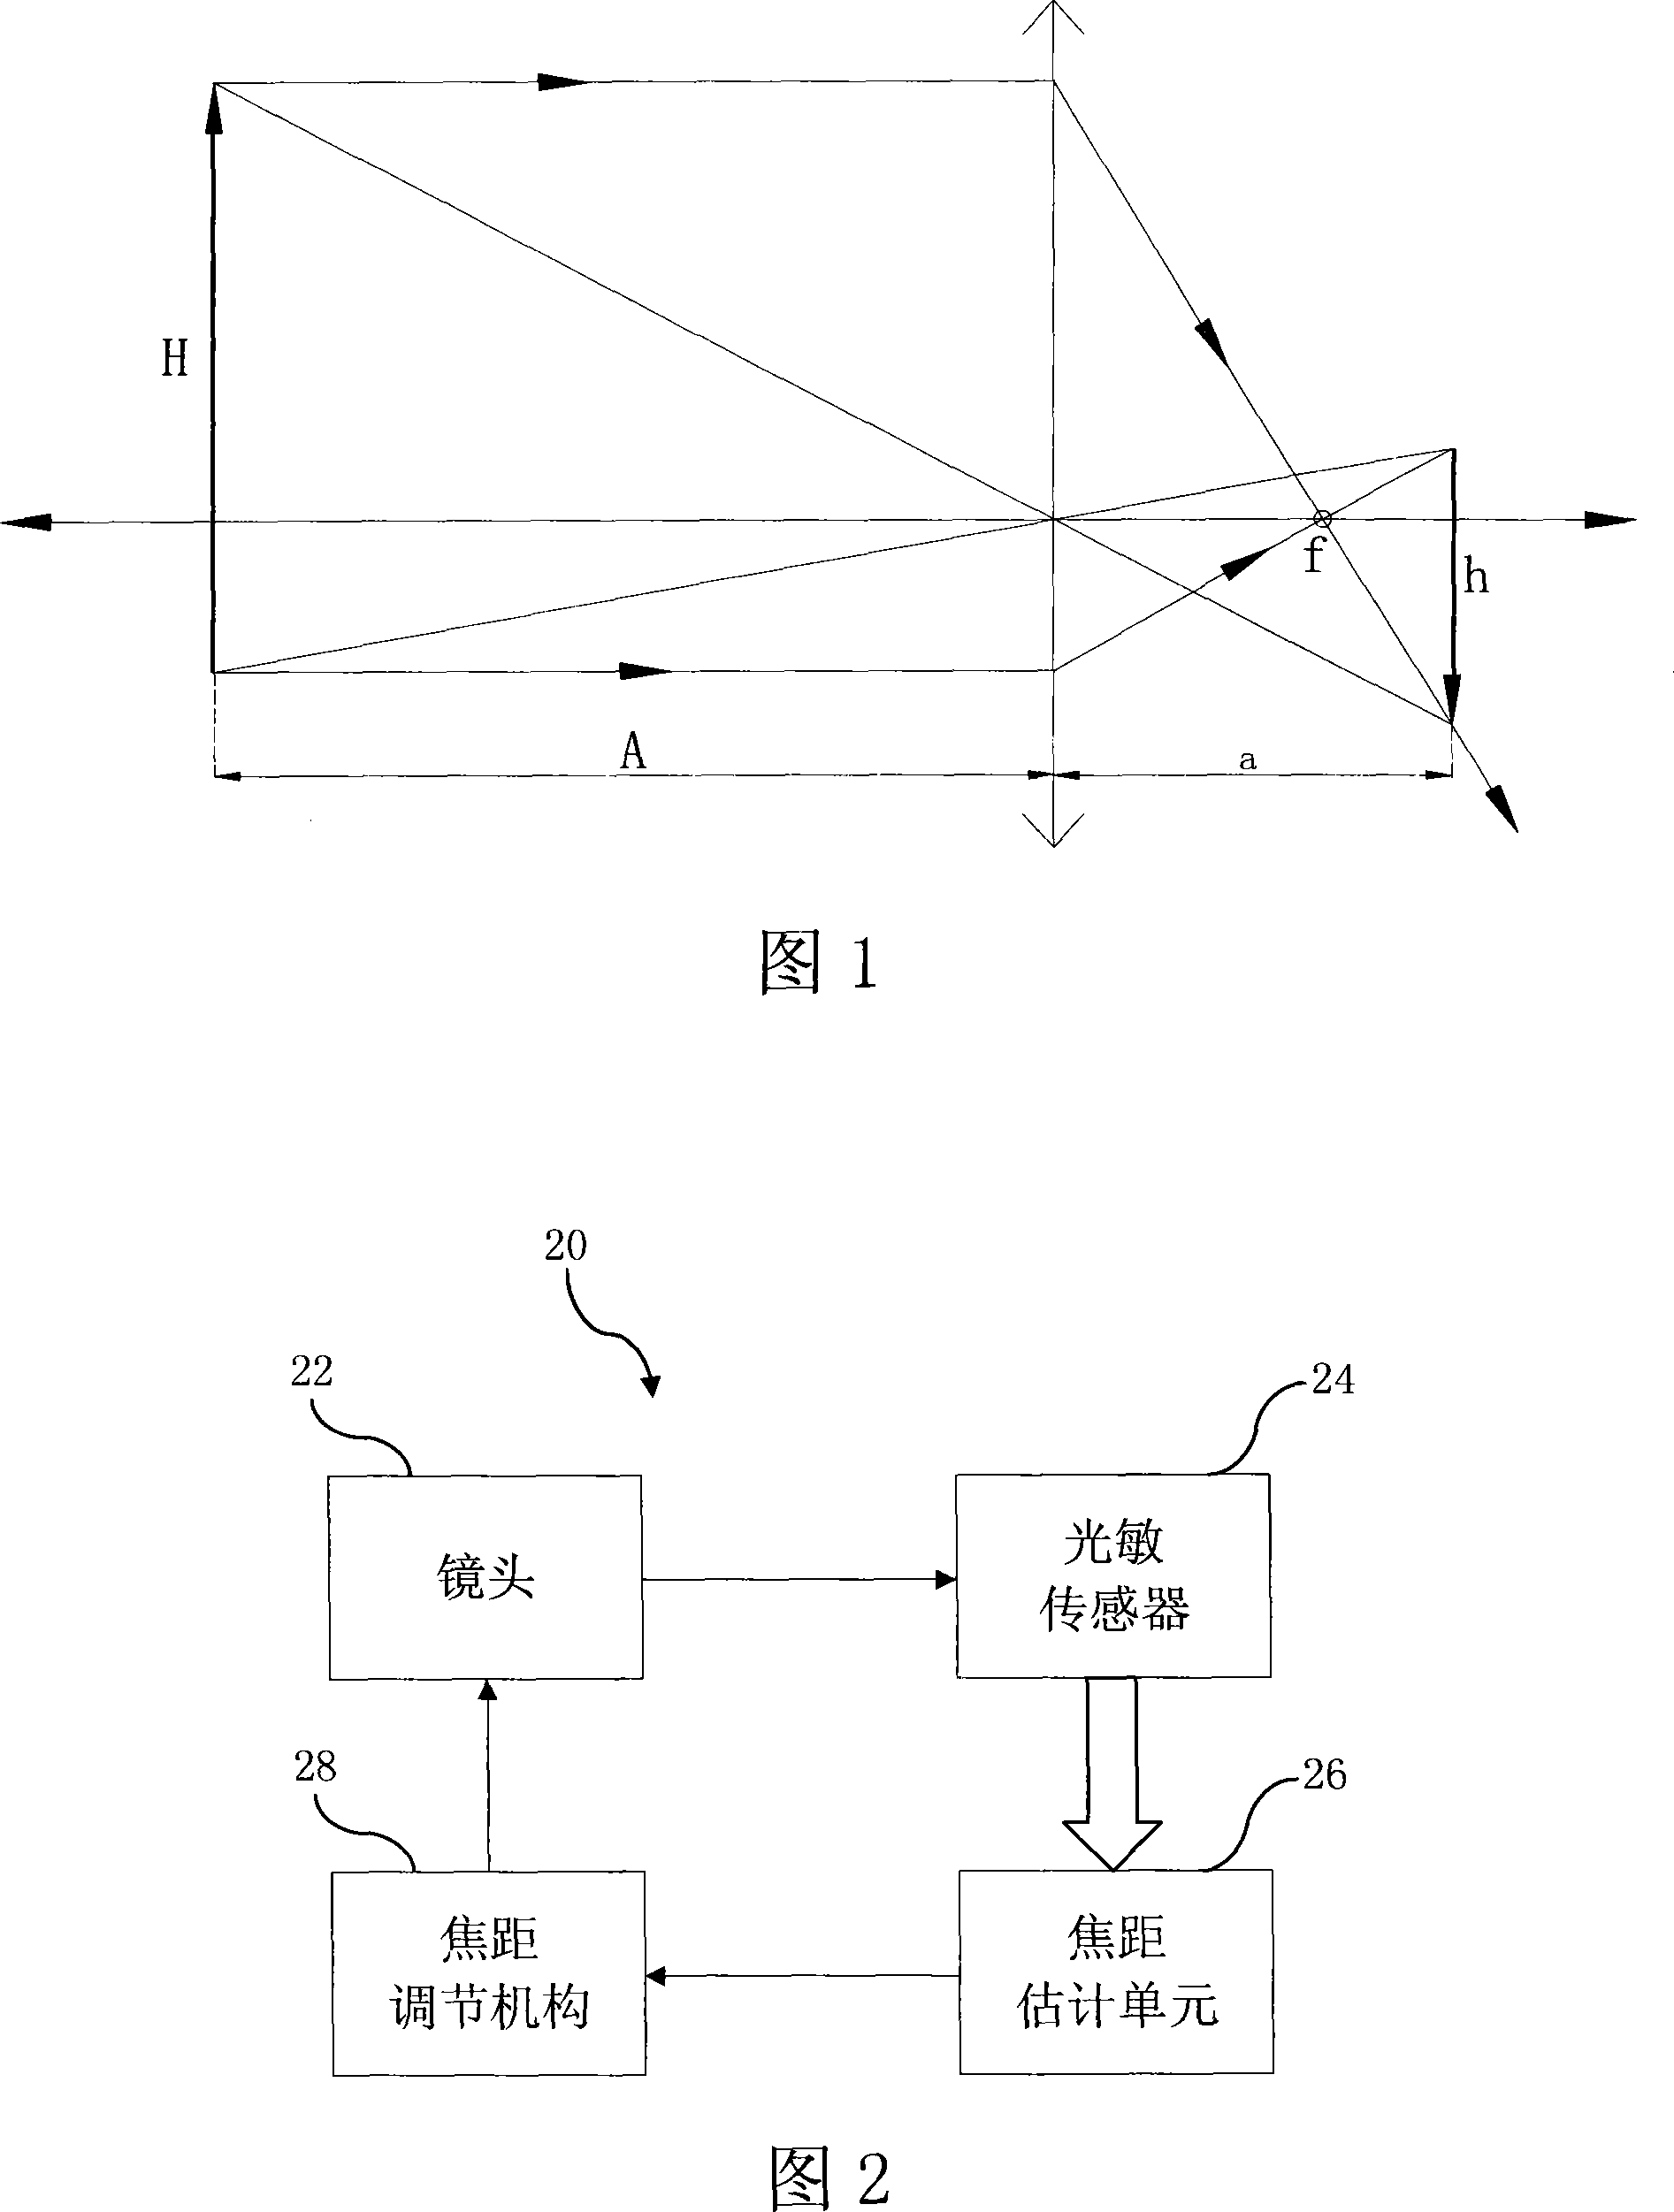 Automatic focusing method and image collecting device